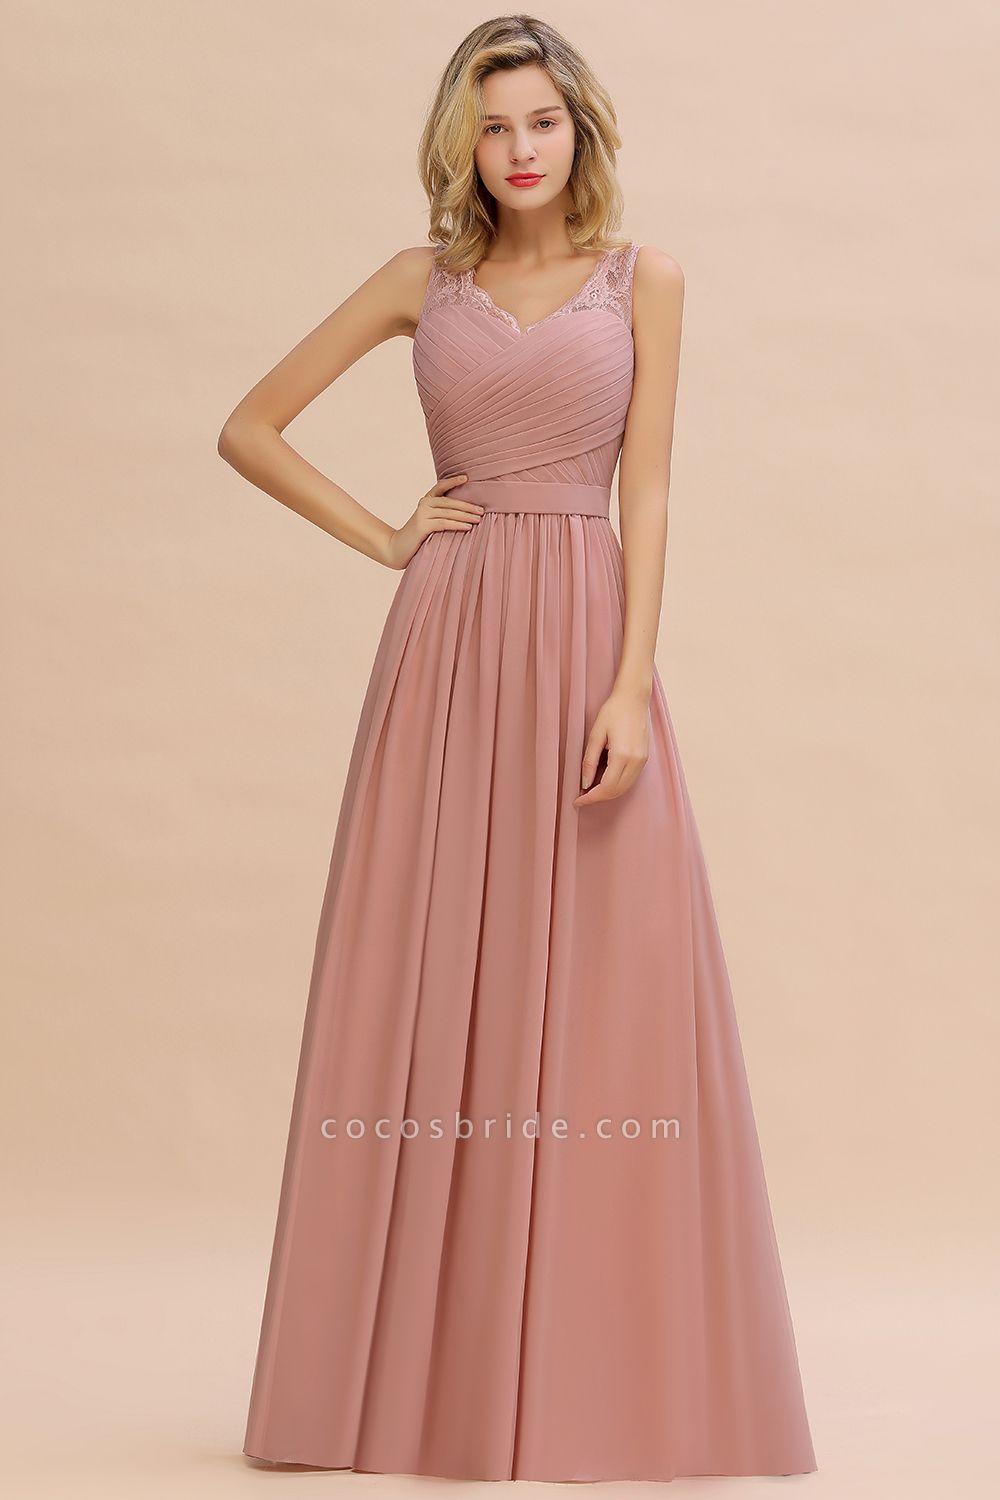 Classy Wide Straps V-neck A-line Floor-length Ruched Chiffon Bridesmaid Dress